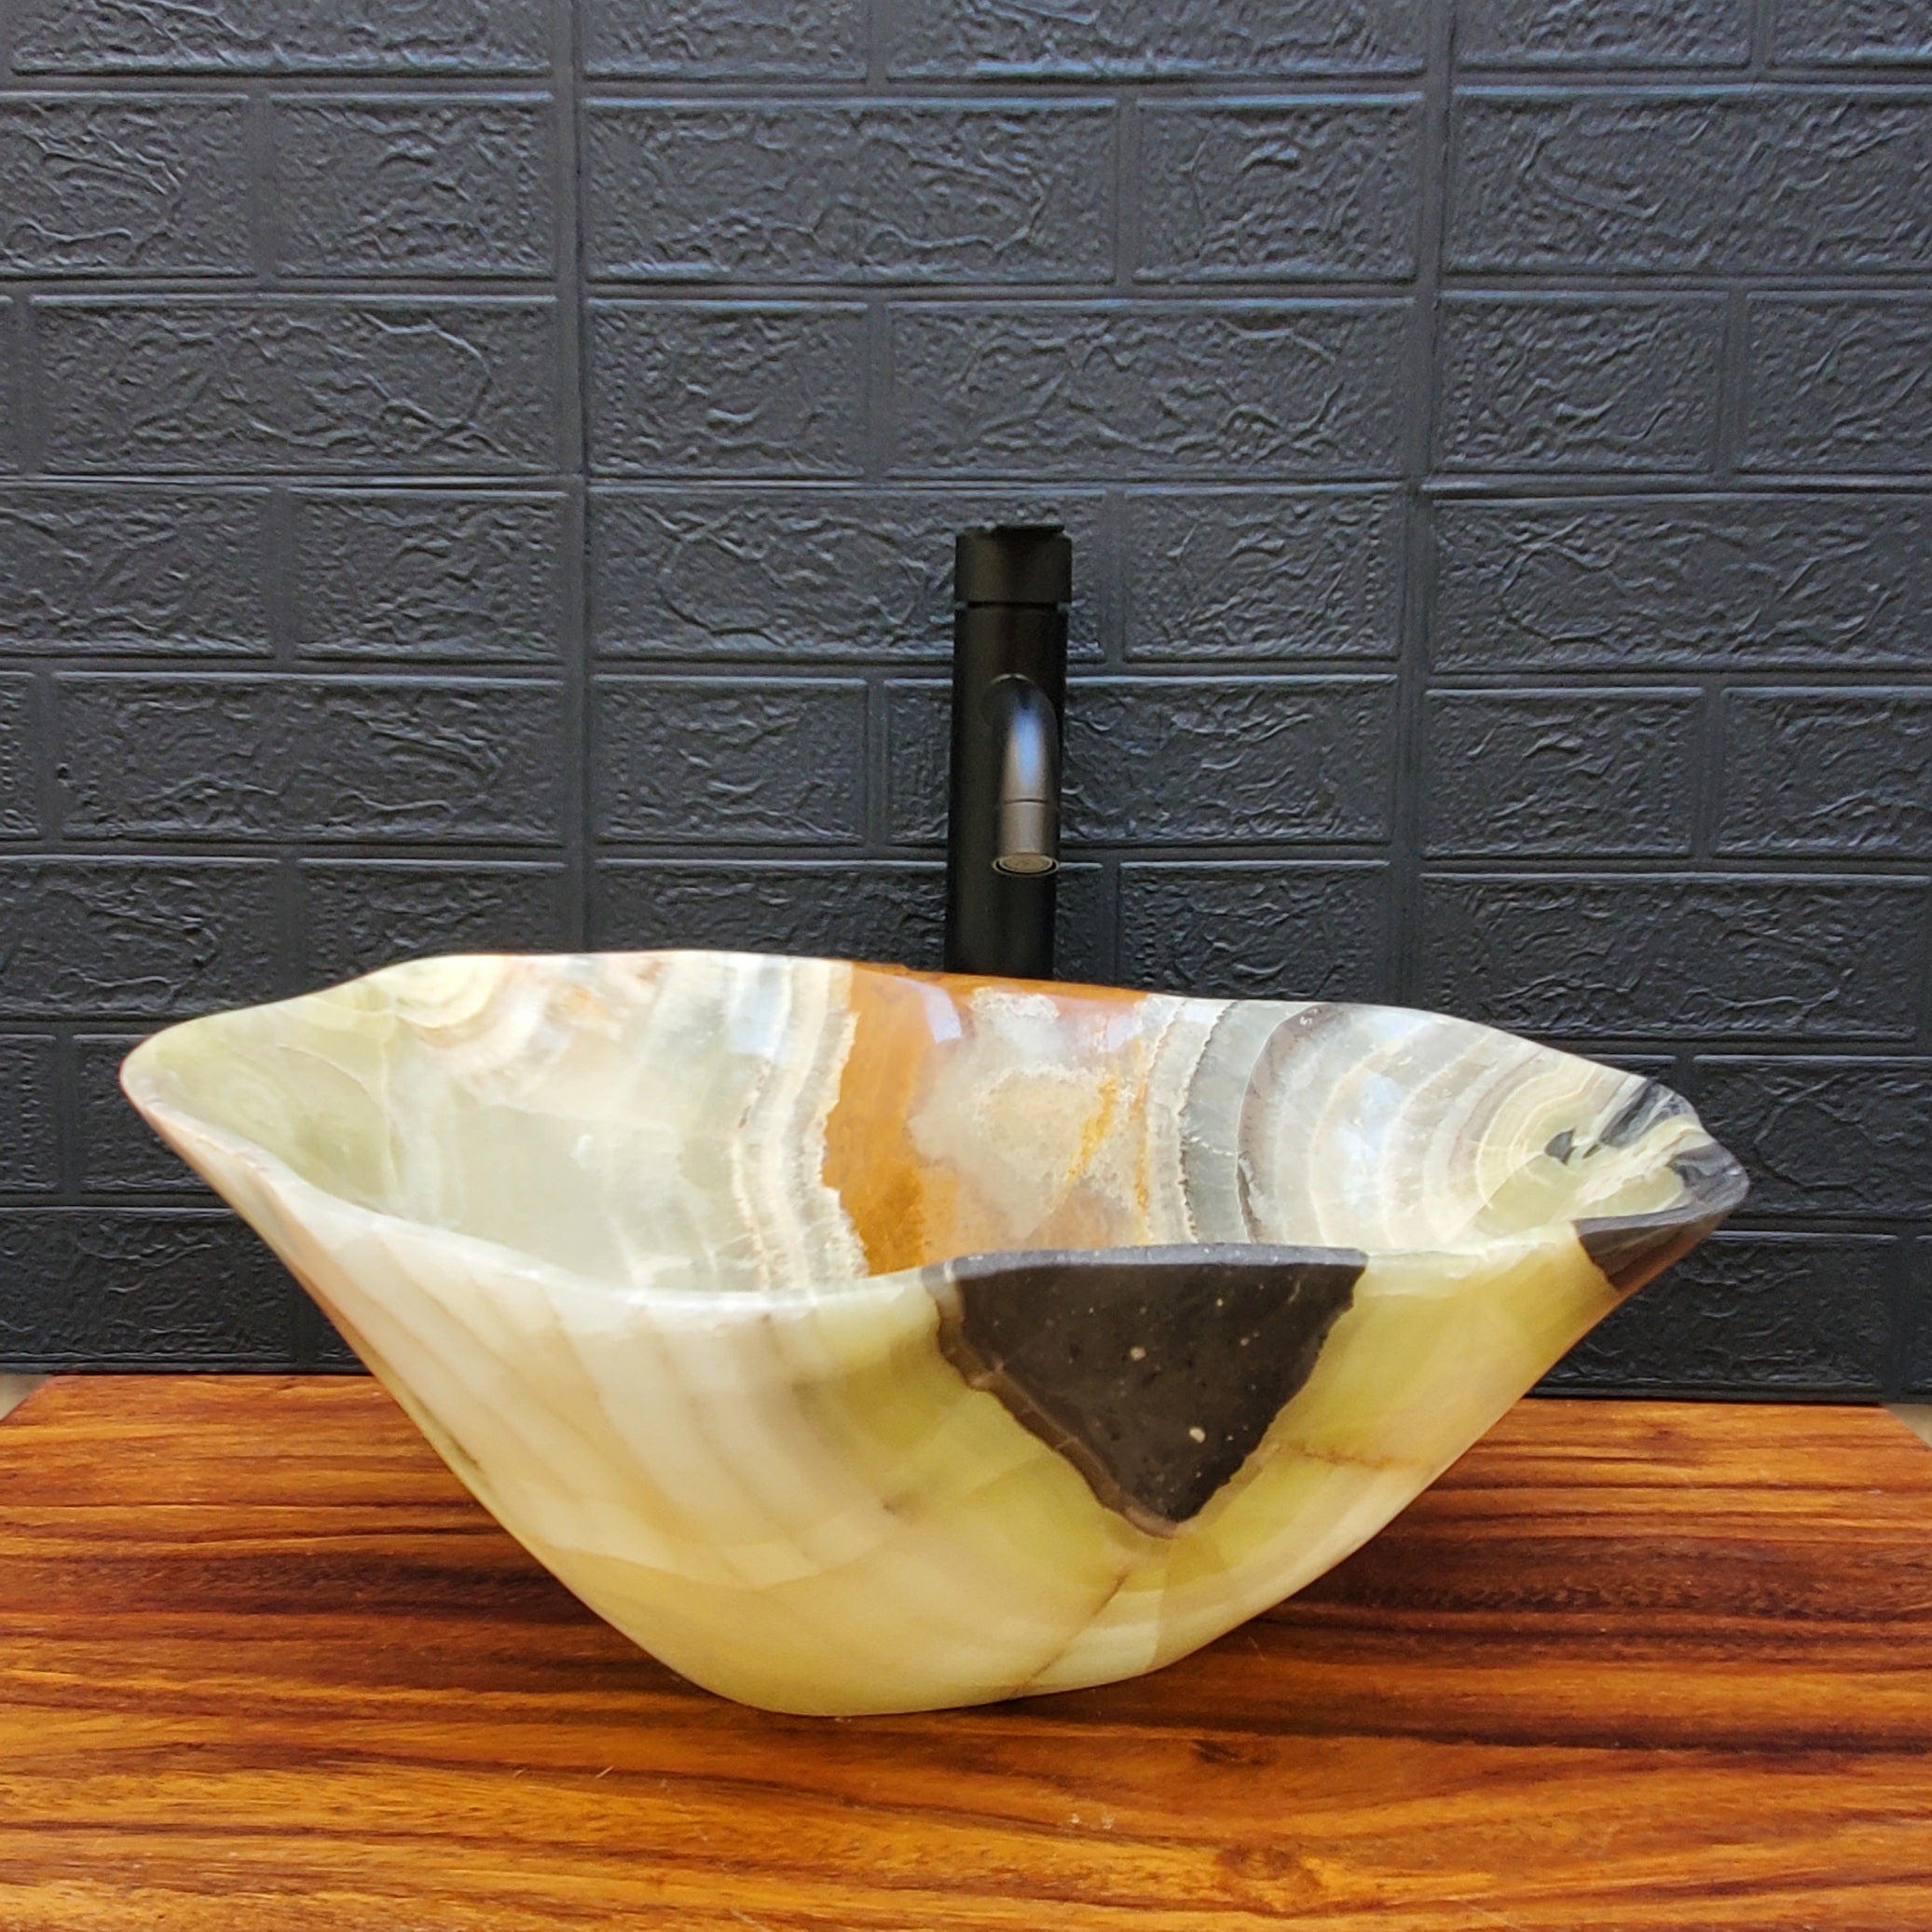 Green, Brown, and Black Onyx Vessel Sink. Handmade in Mexico. Hand Finished and Ships from The USA. Buy now at www.felipeandgrace.com.